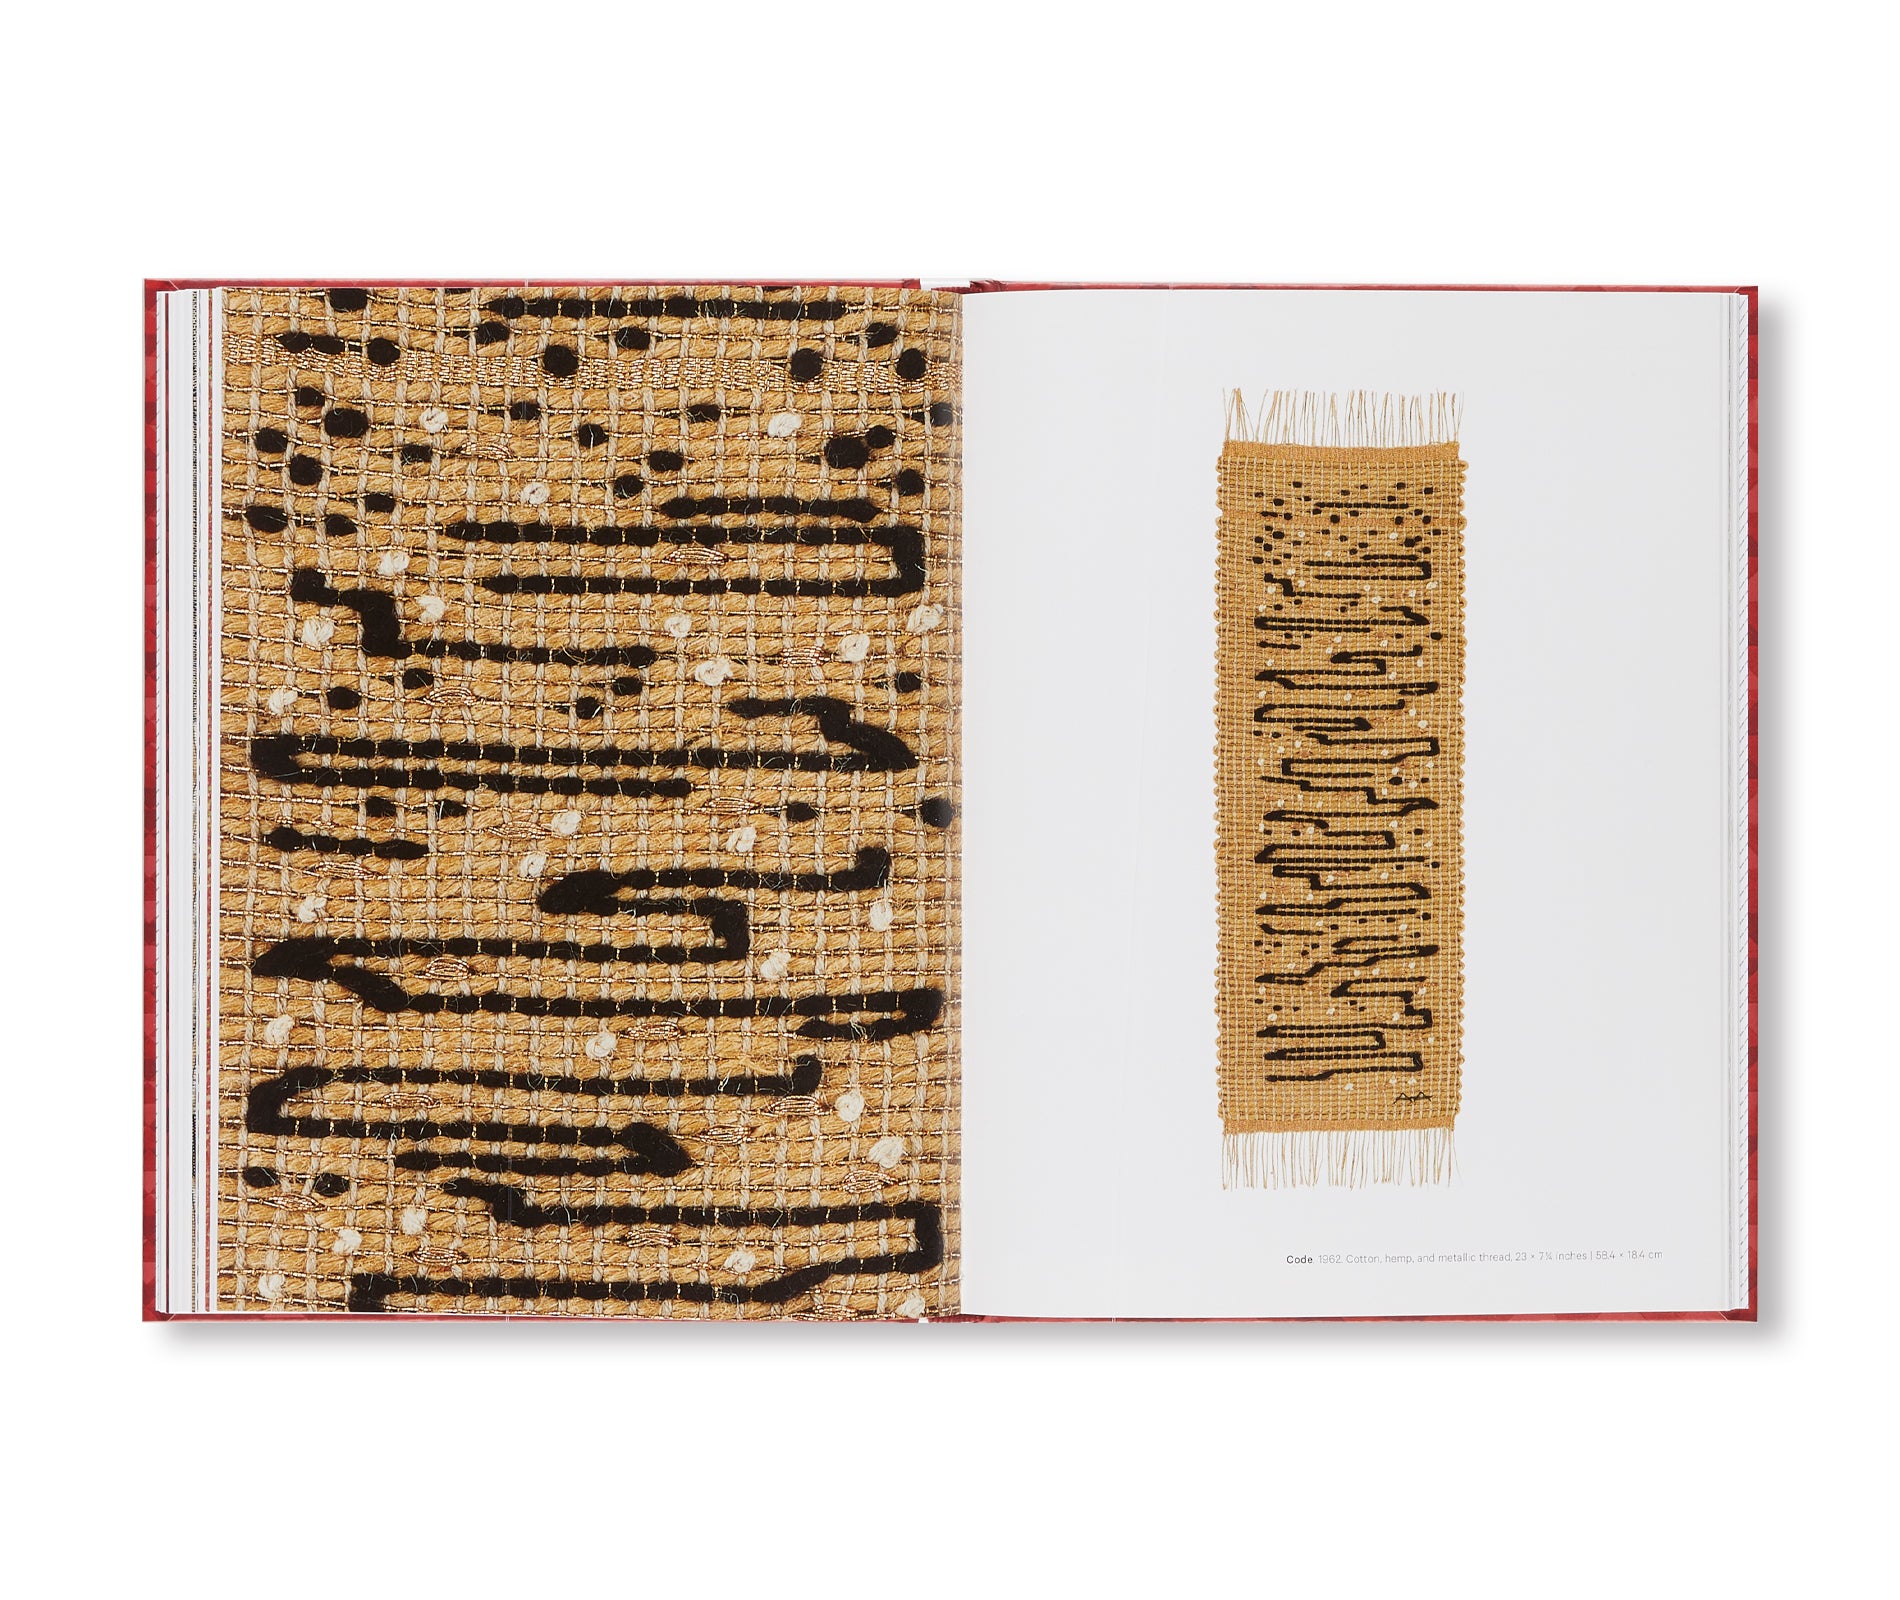 CAMINO REAL by Anni Albers